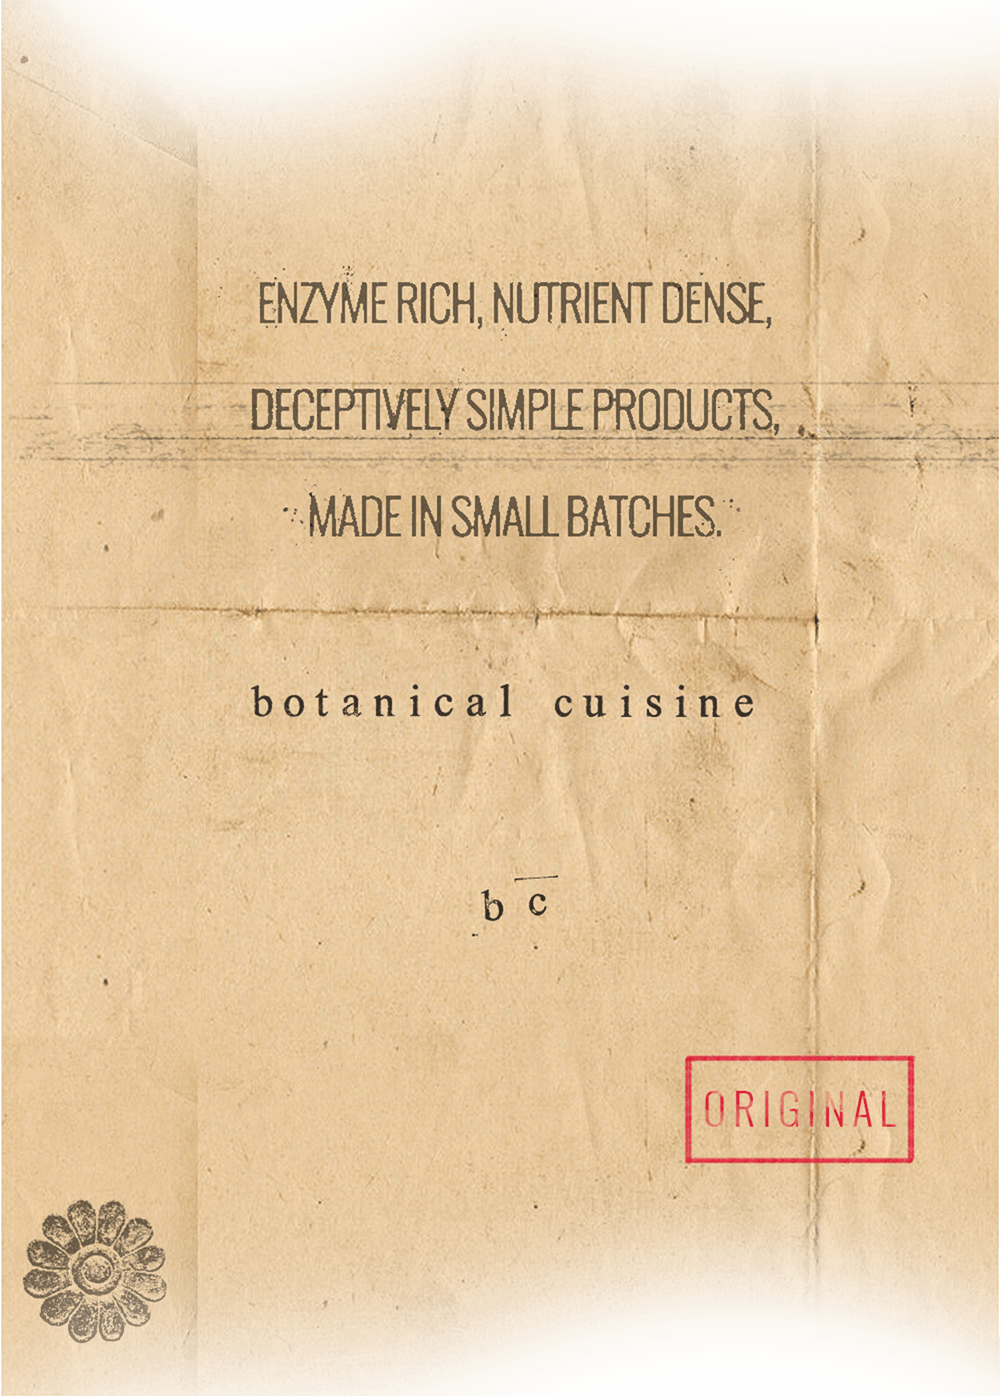 Enzyme rich. Nutrient dense. Deceptively simple products. Made in small batches. Botanical Cuisine Original.